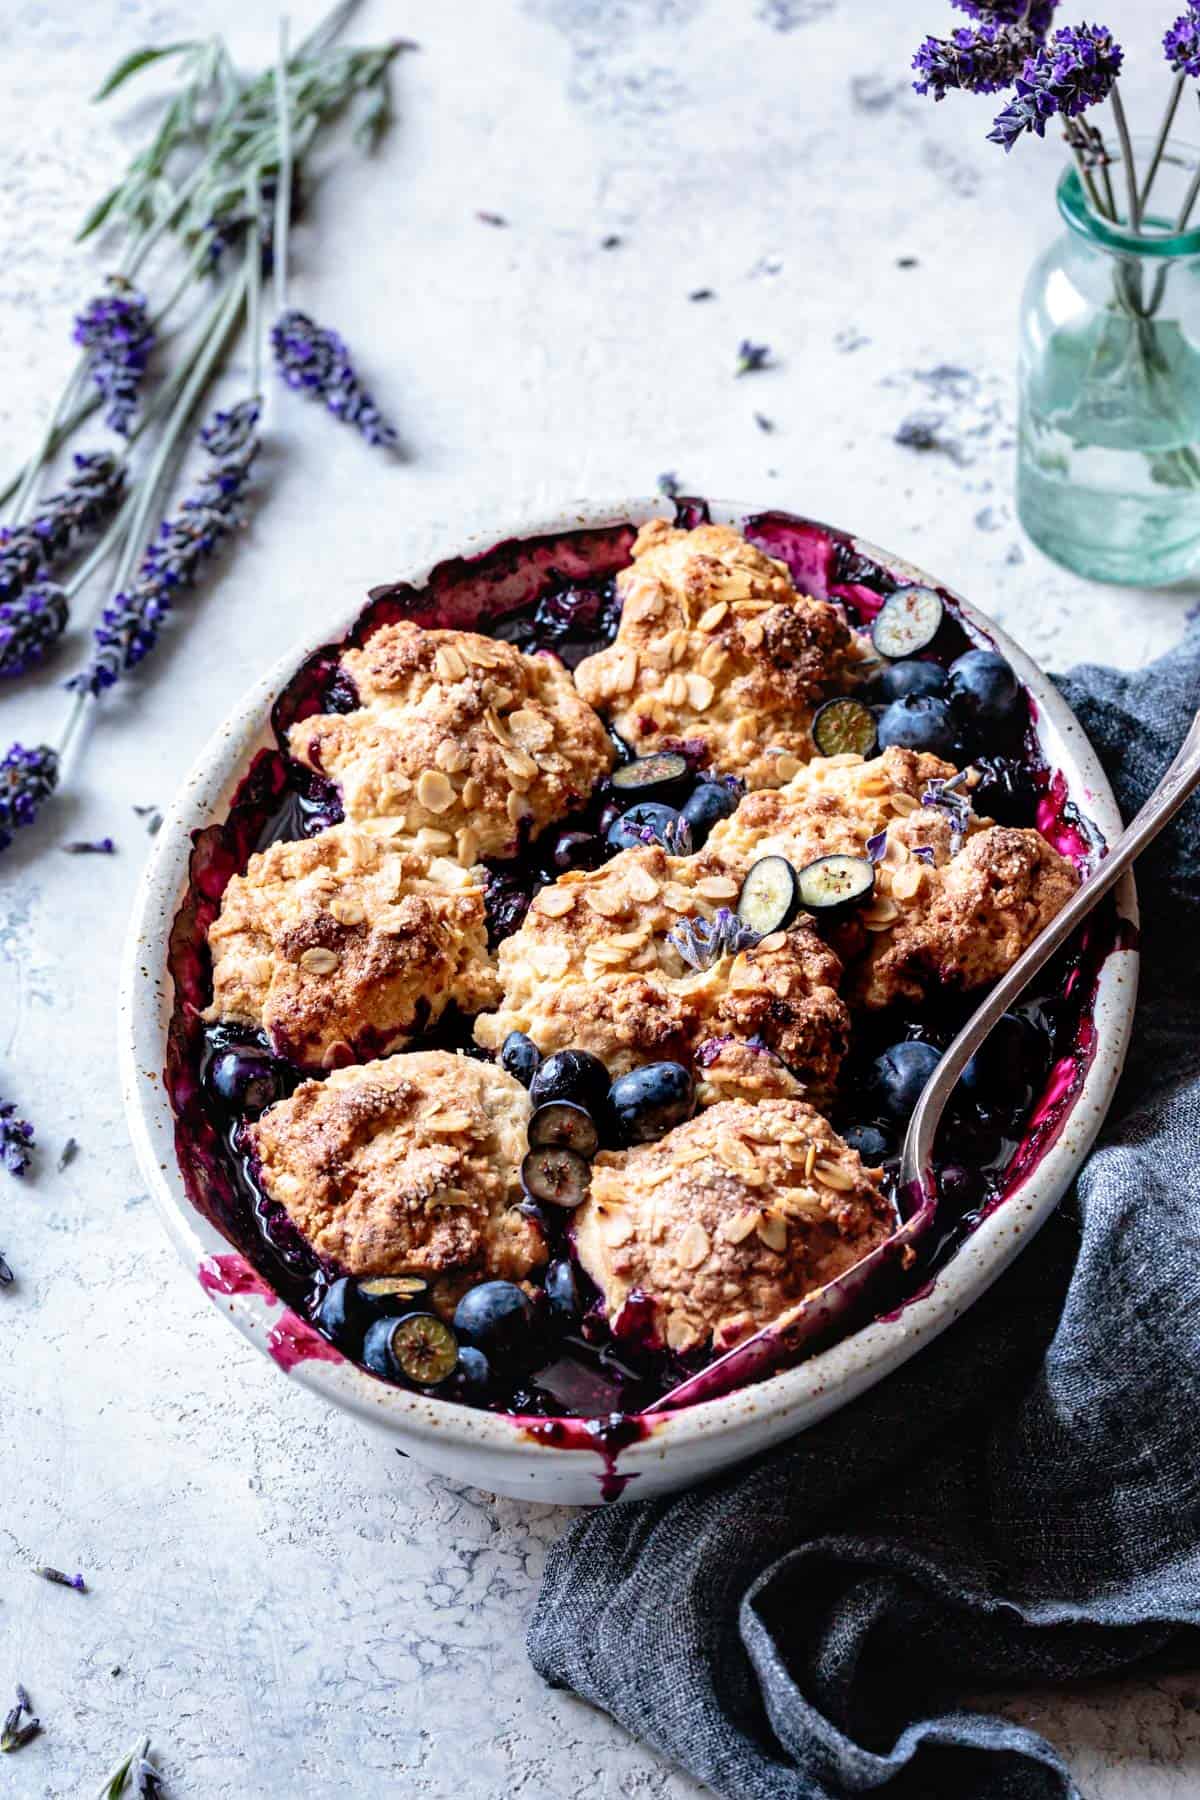 Easy Vegan Gluten-Free Cobbler, fresh from the oven in a baking dish